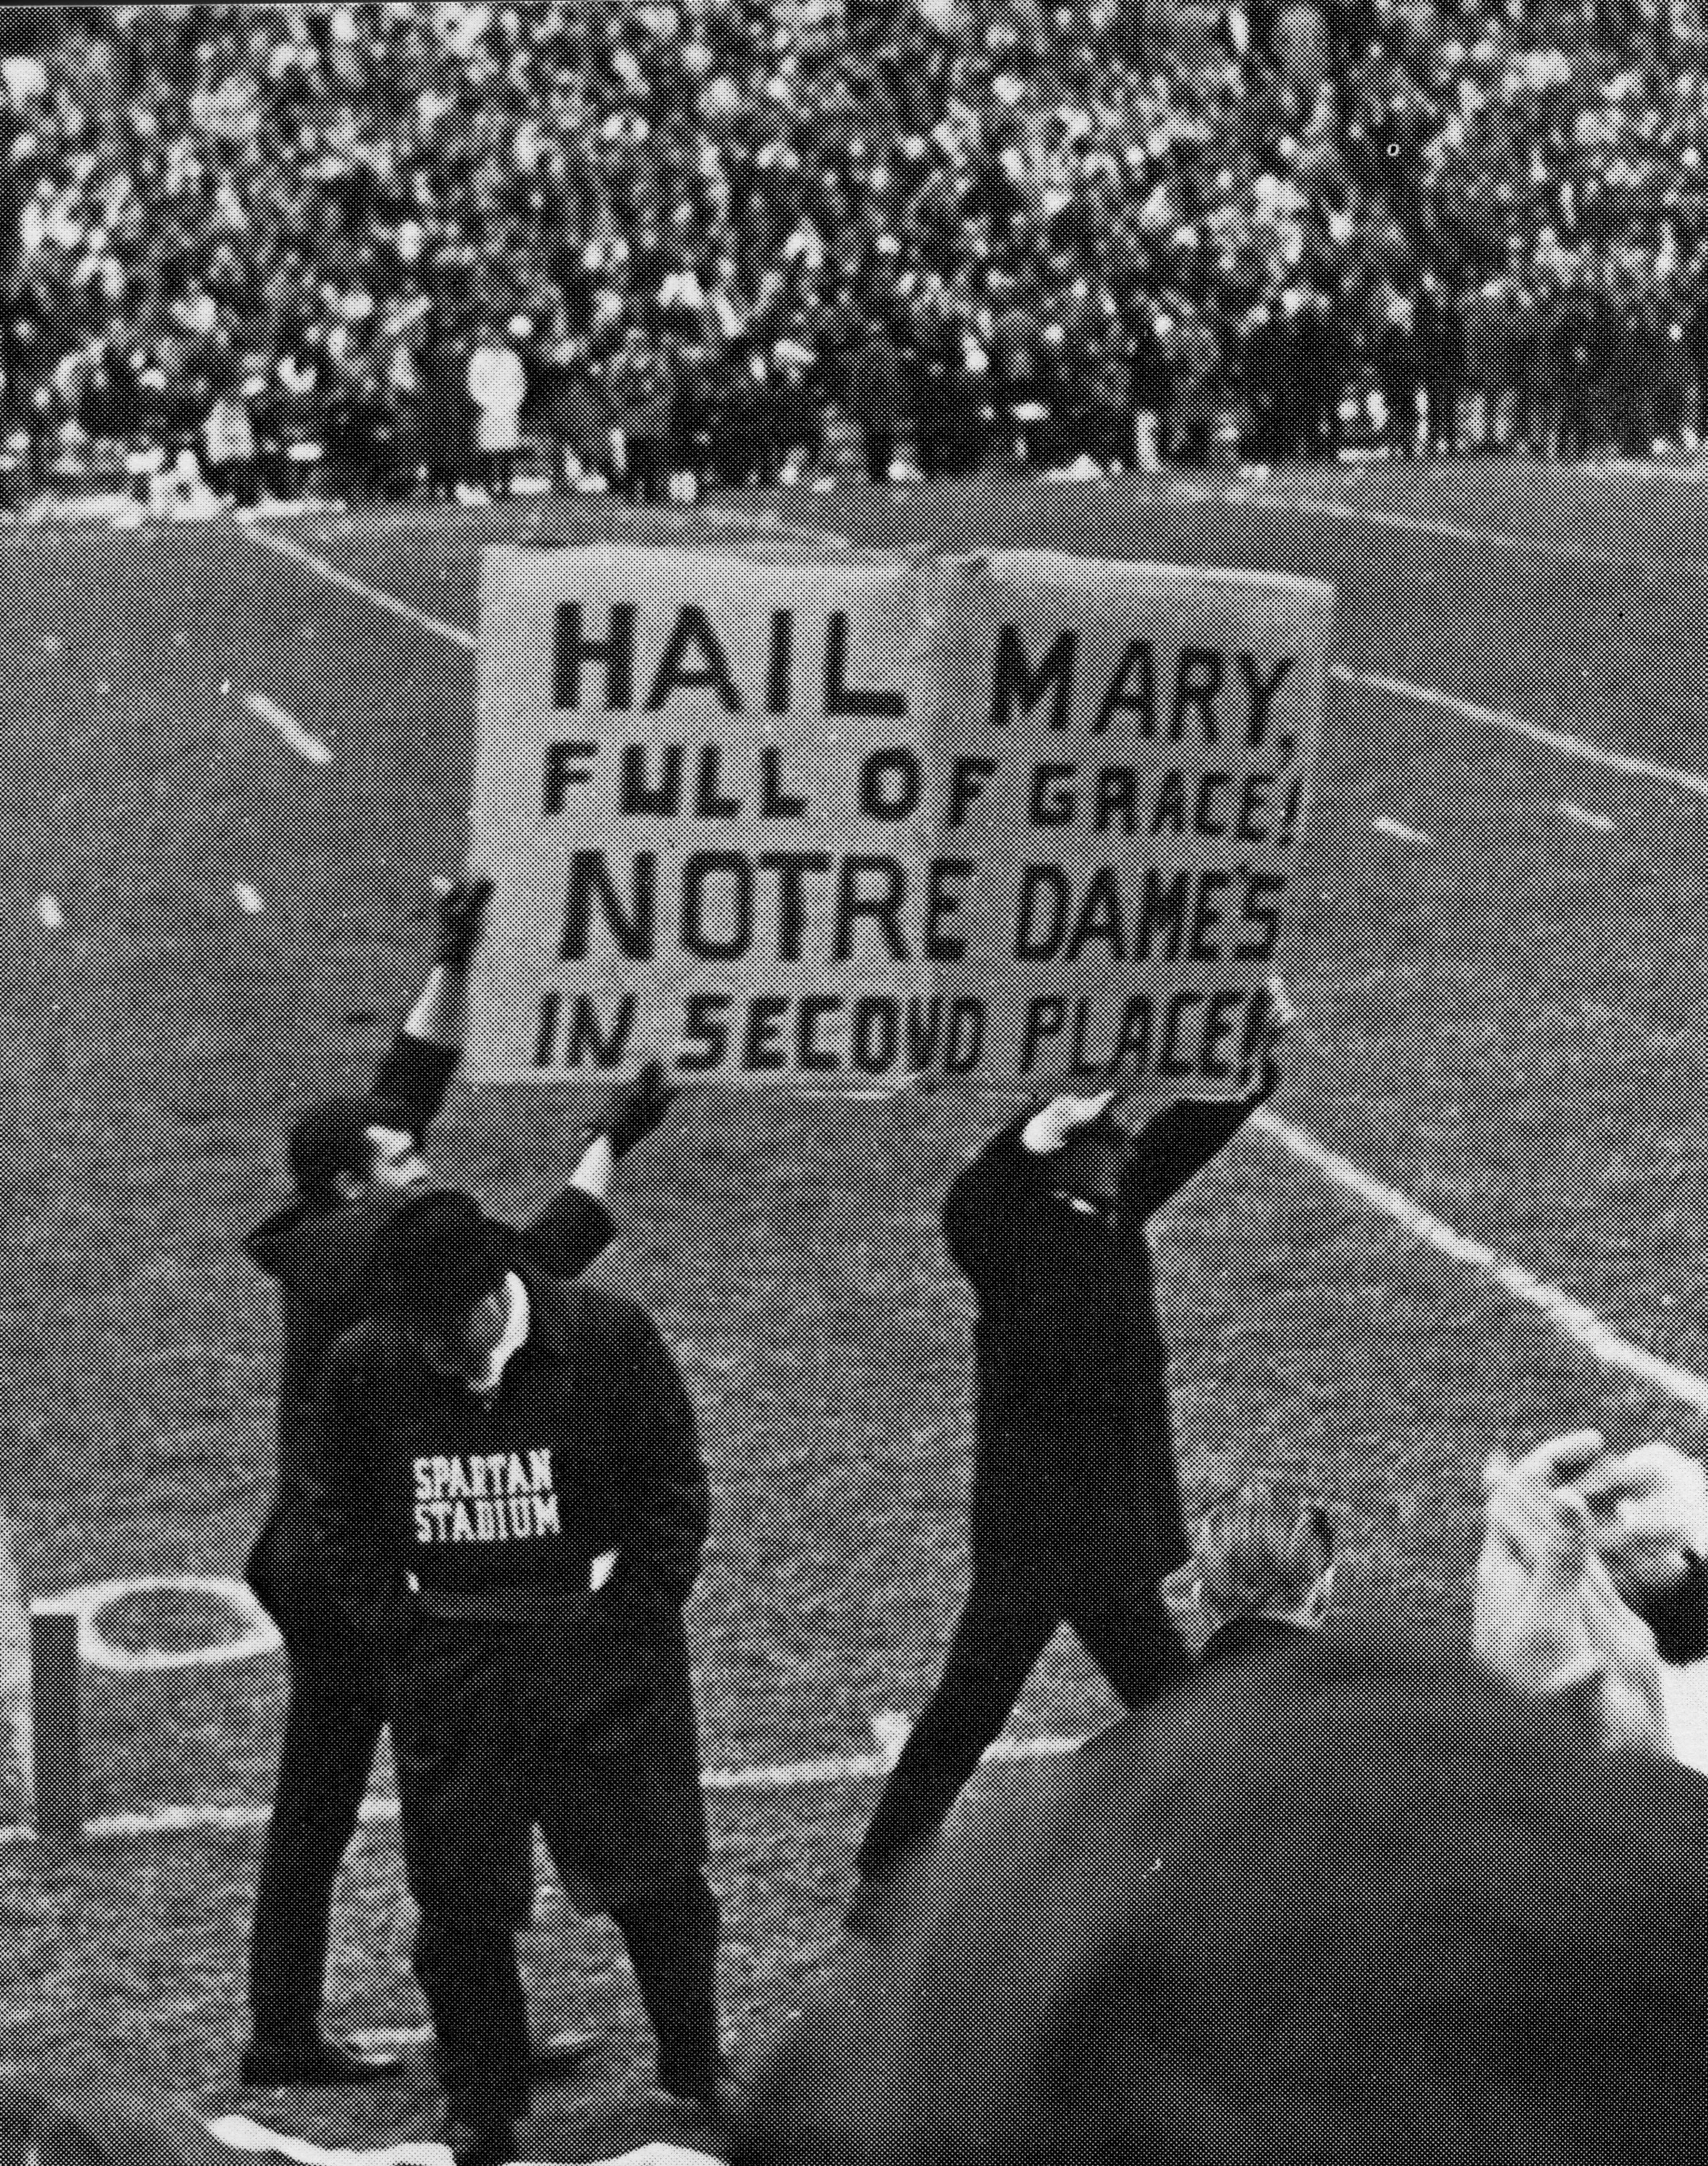 Fans holding a sign at the MSU-Notre Dame football game, 1966